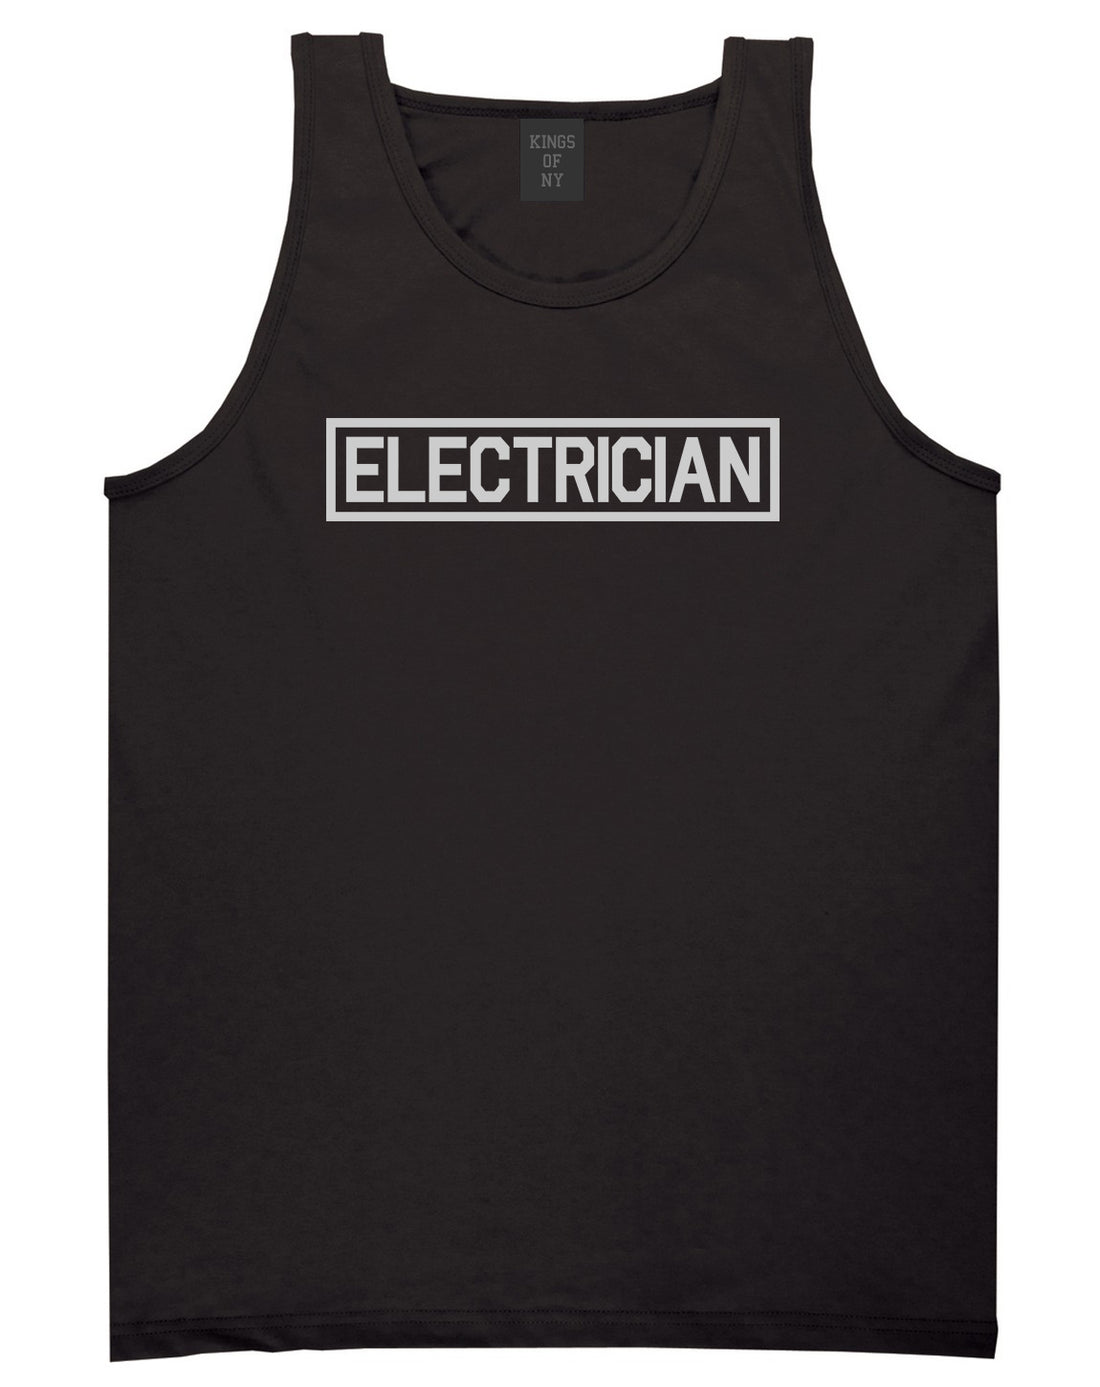 Electrician_Occupation Mens Black Tank Top Shirt by Kings Of NY